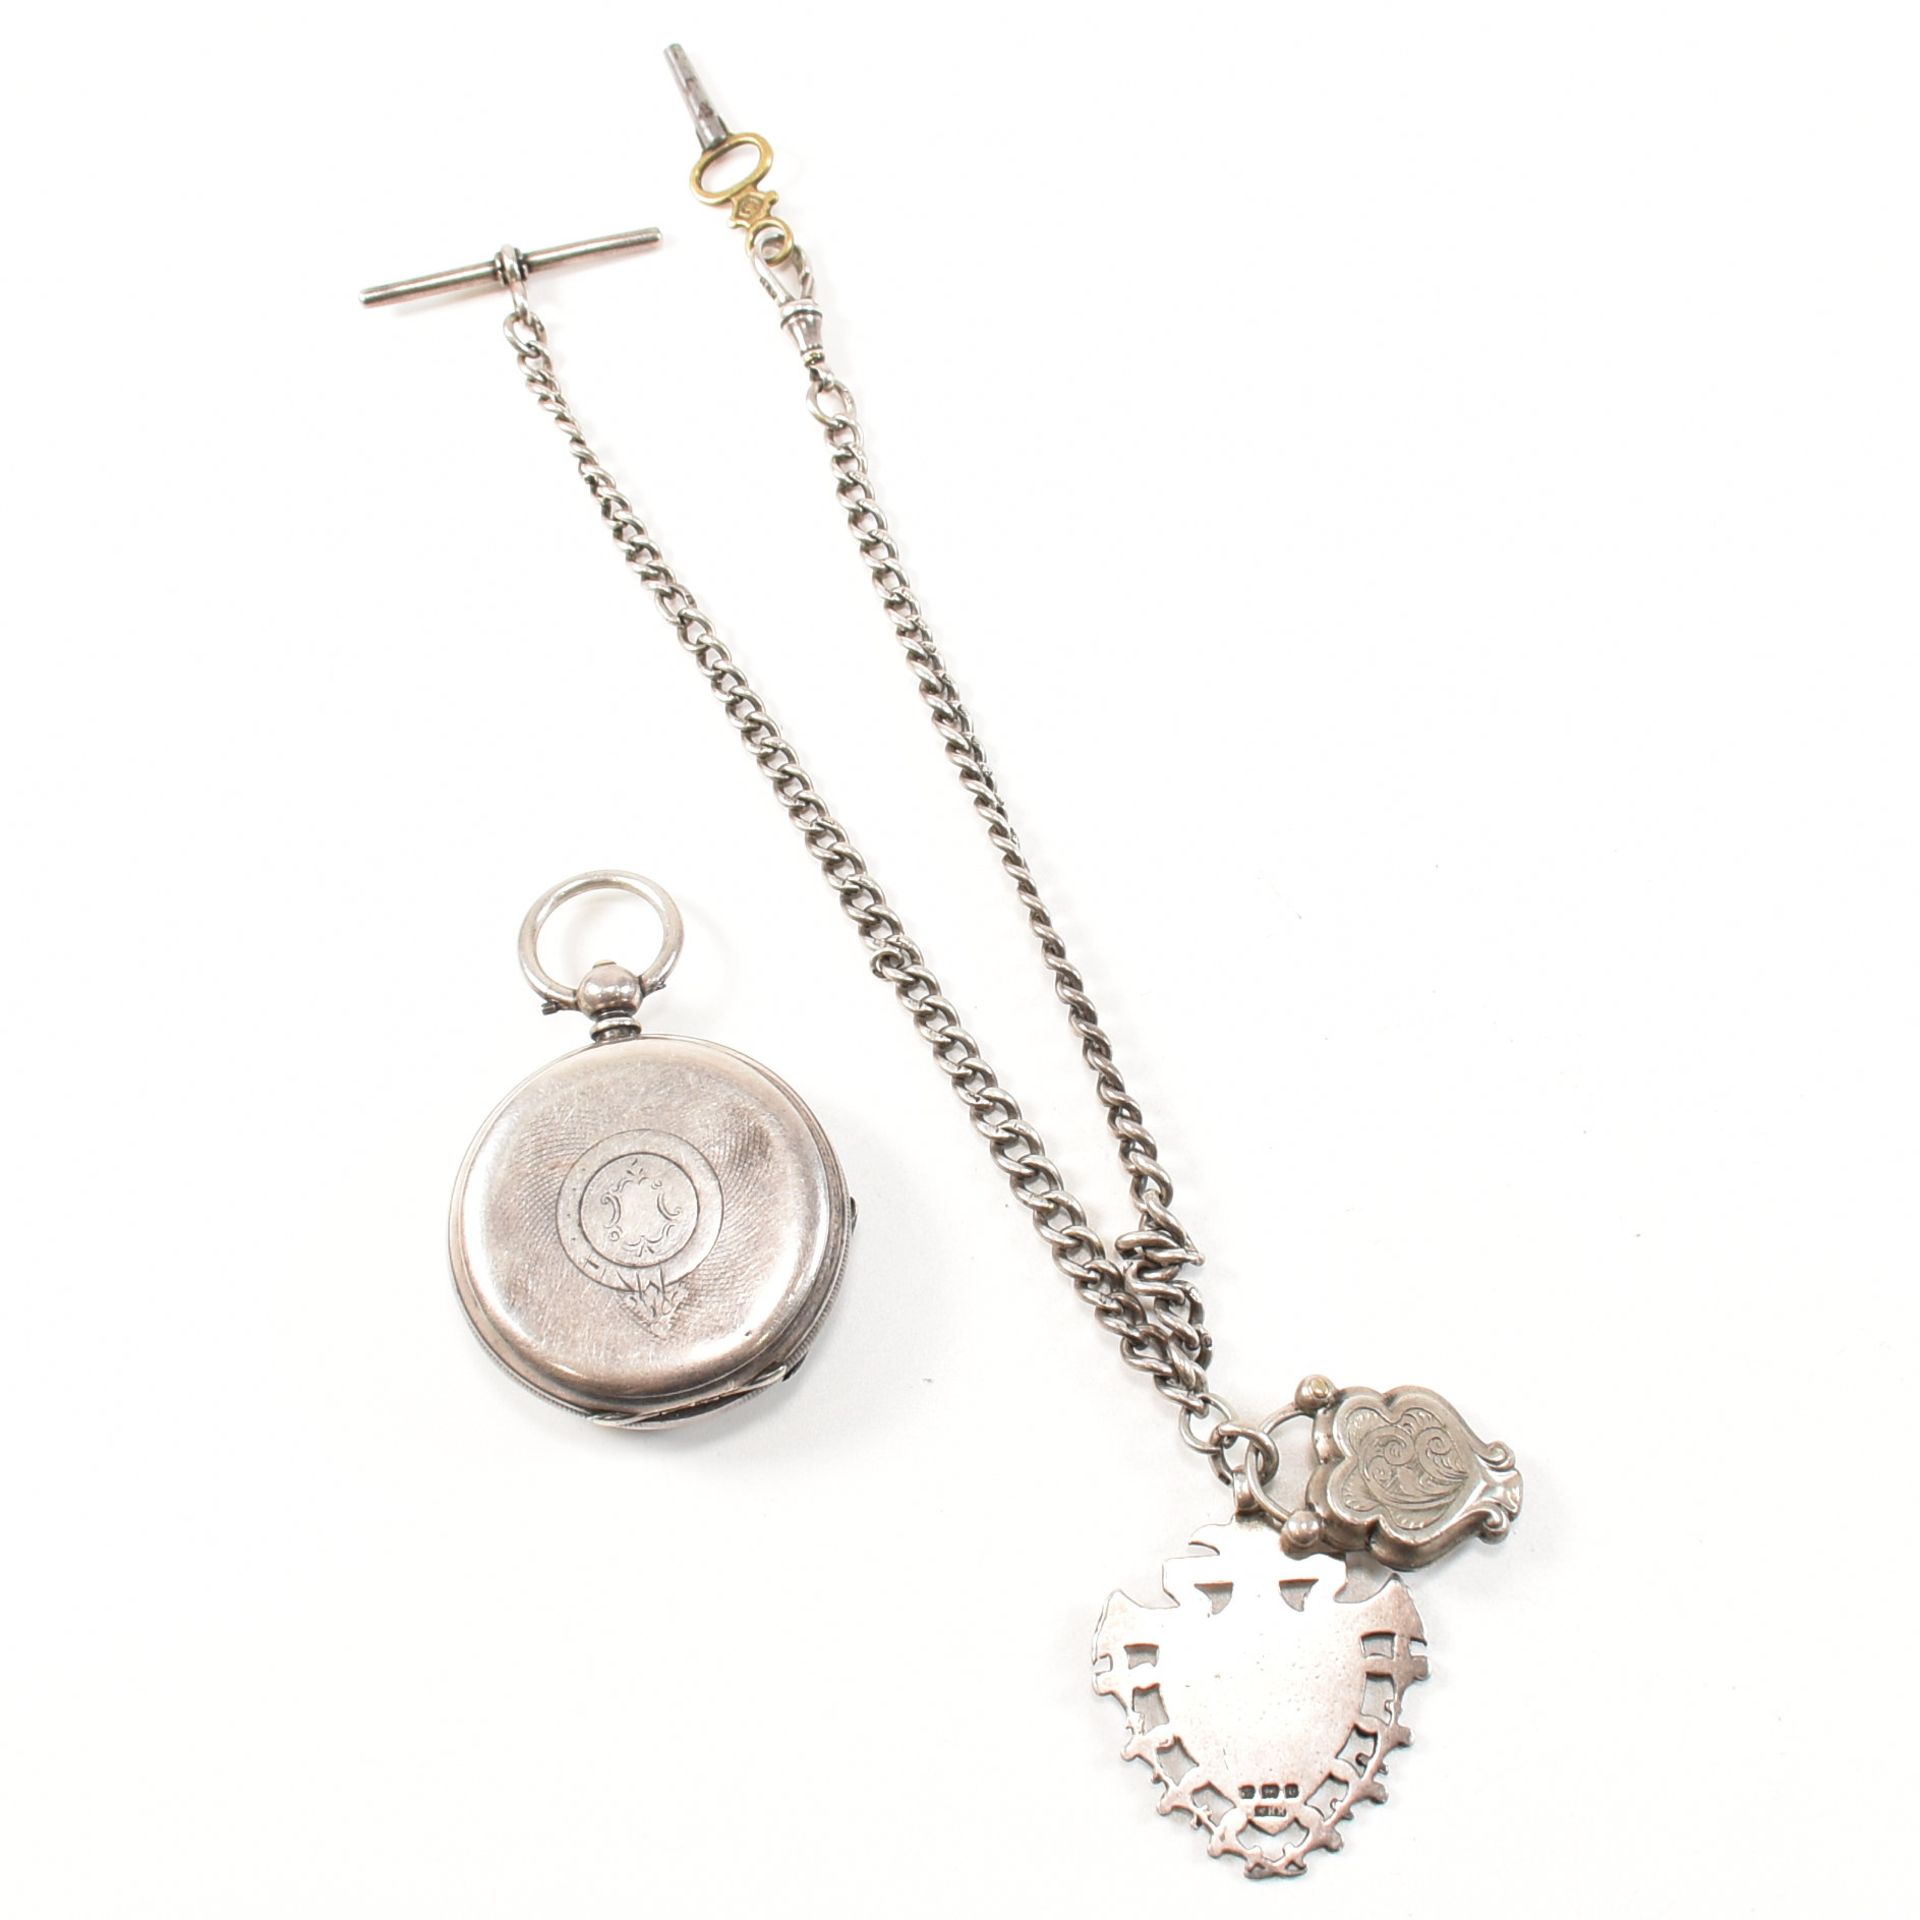 VICTORIAN SILVER POCKET WATCH ON CHAIN WITH KEY & FOBS - Image 2 of 5